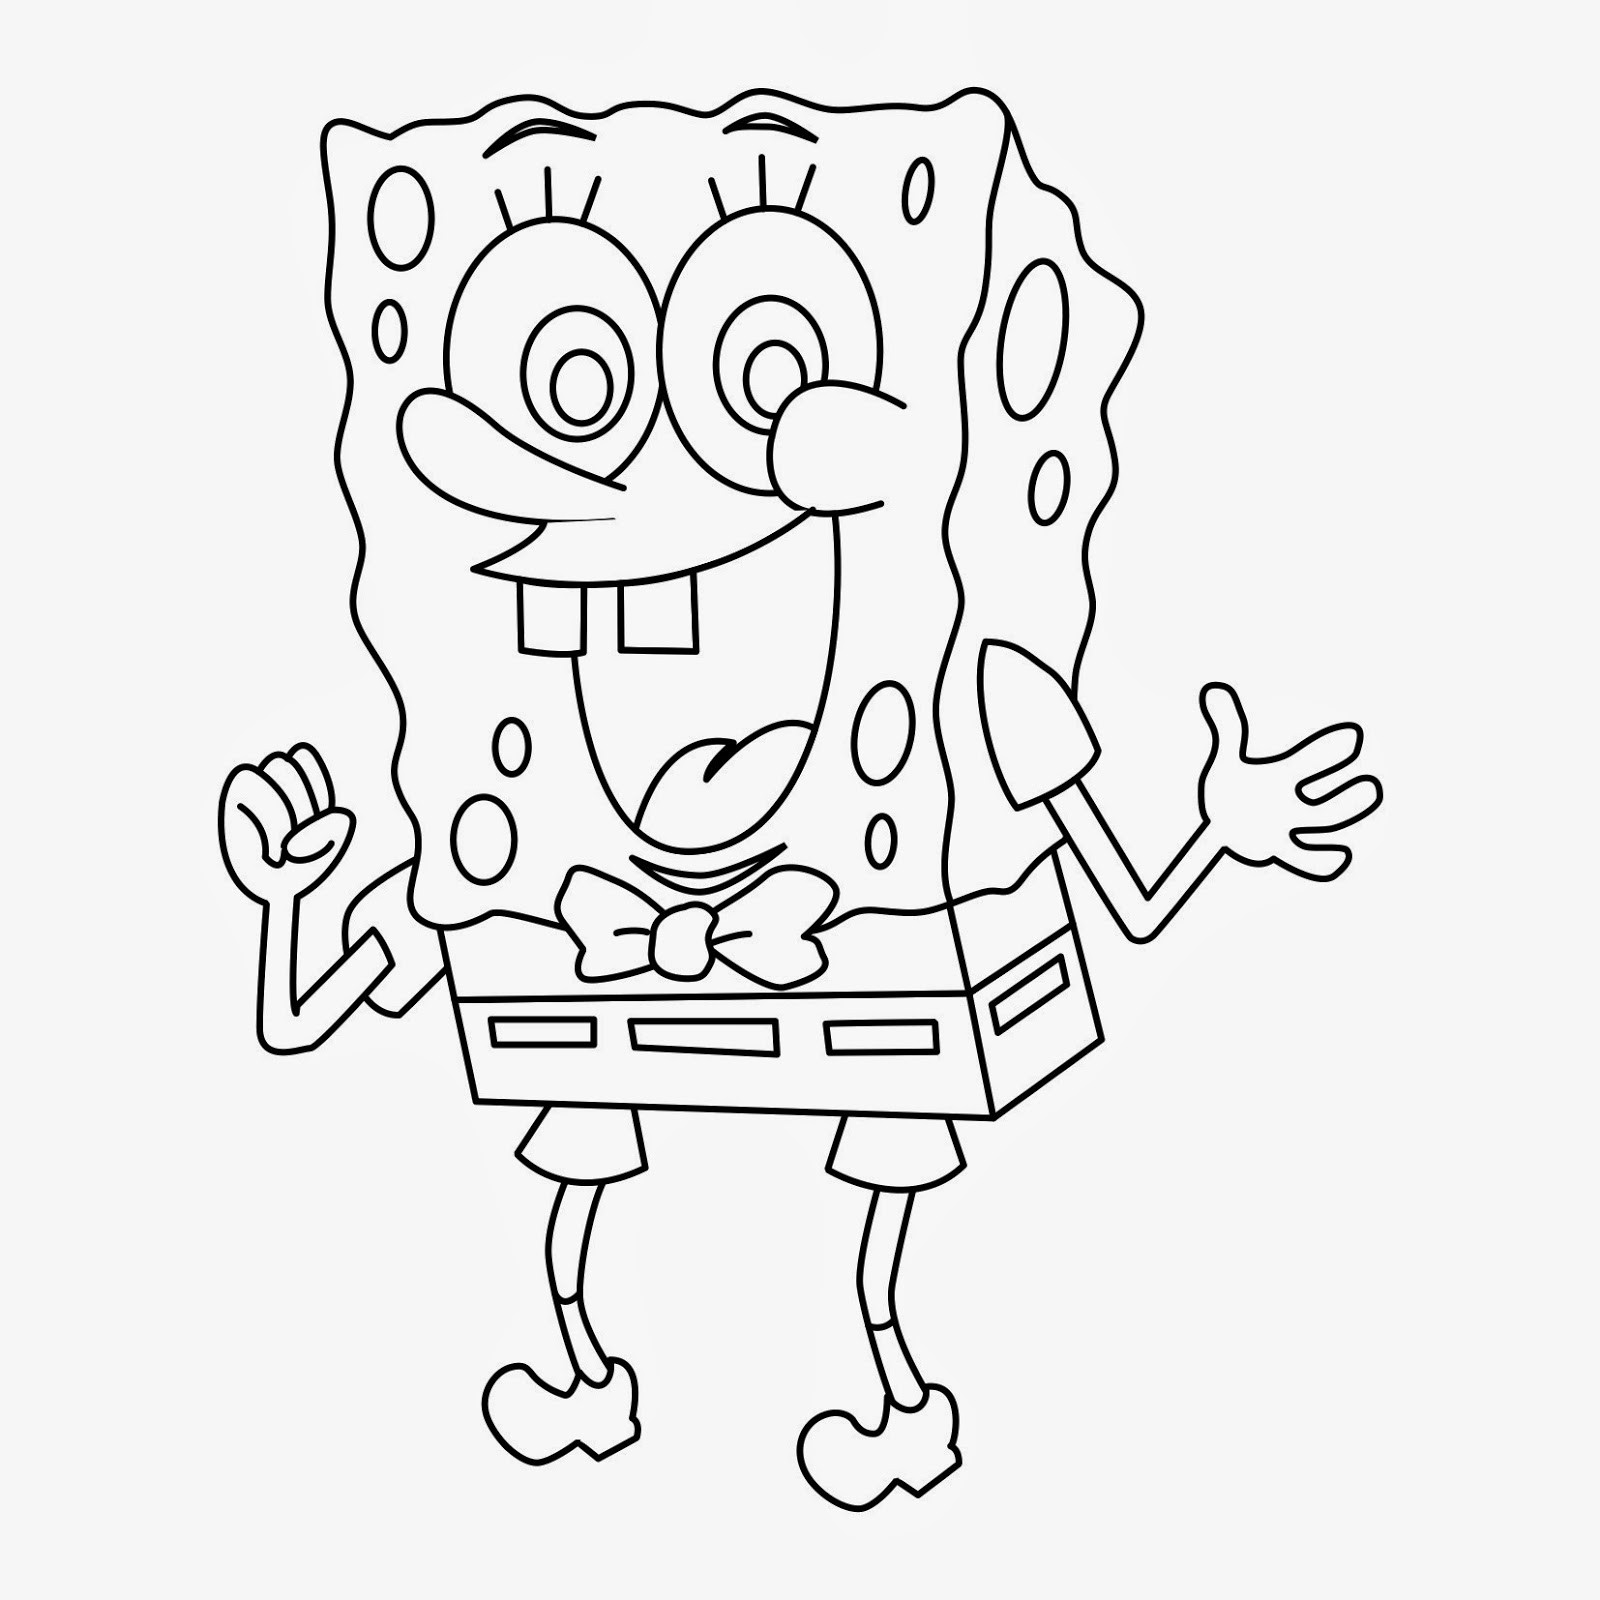 Spongebob Coloring Pages Printable
 Printable coloring pages